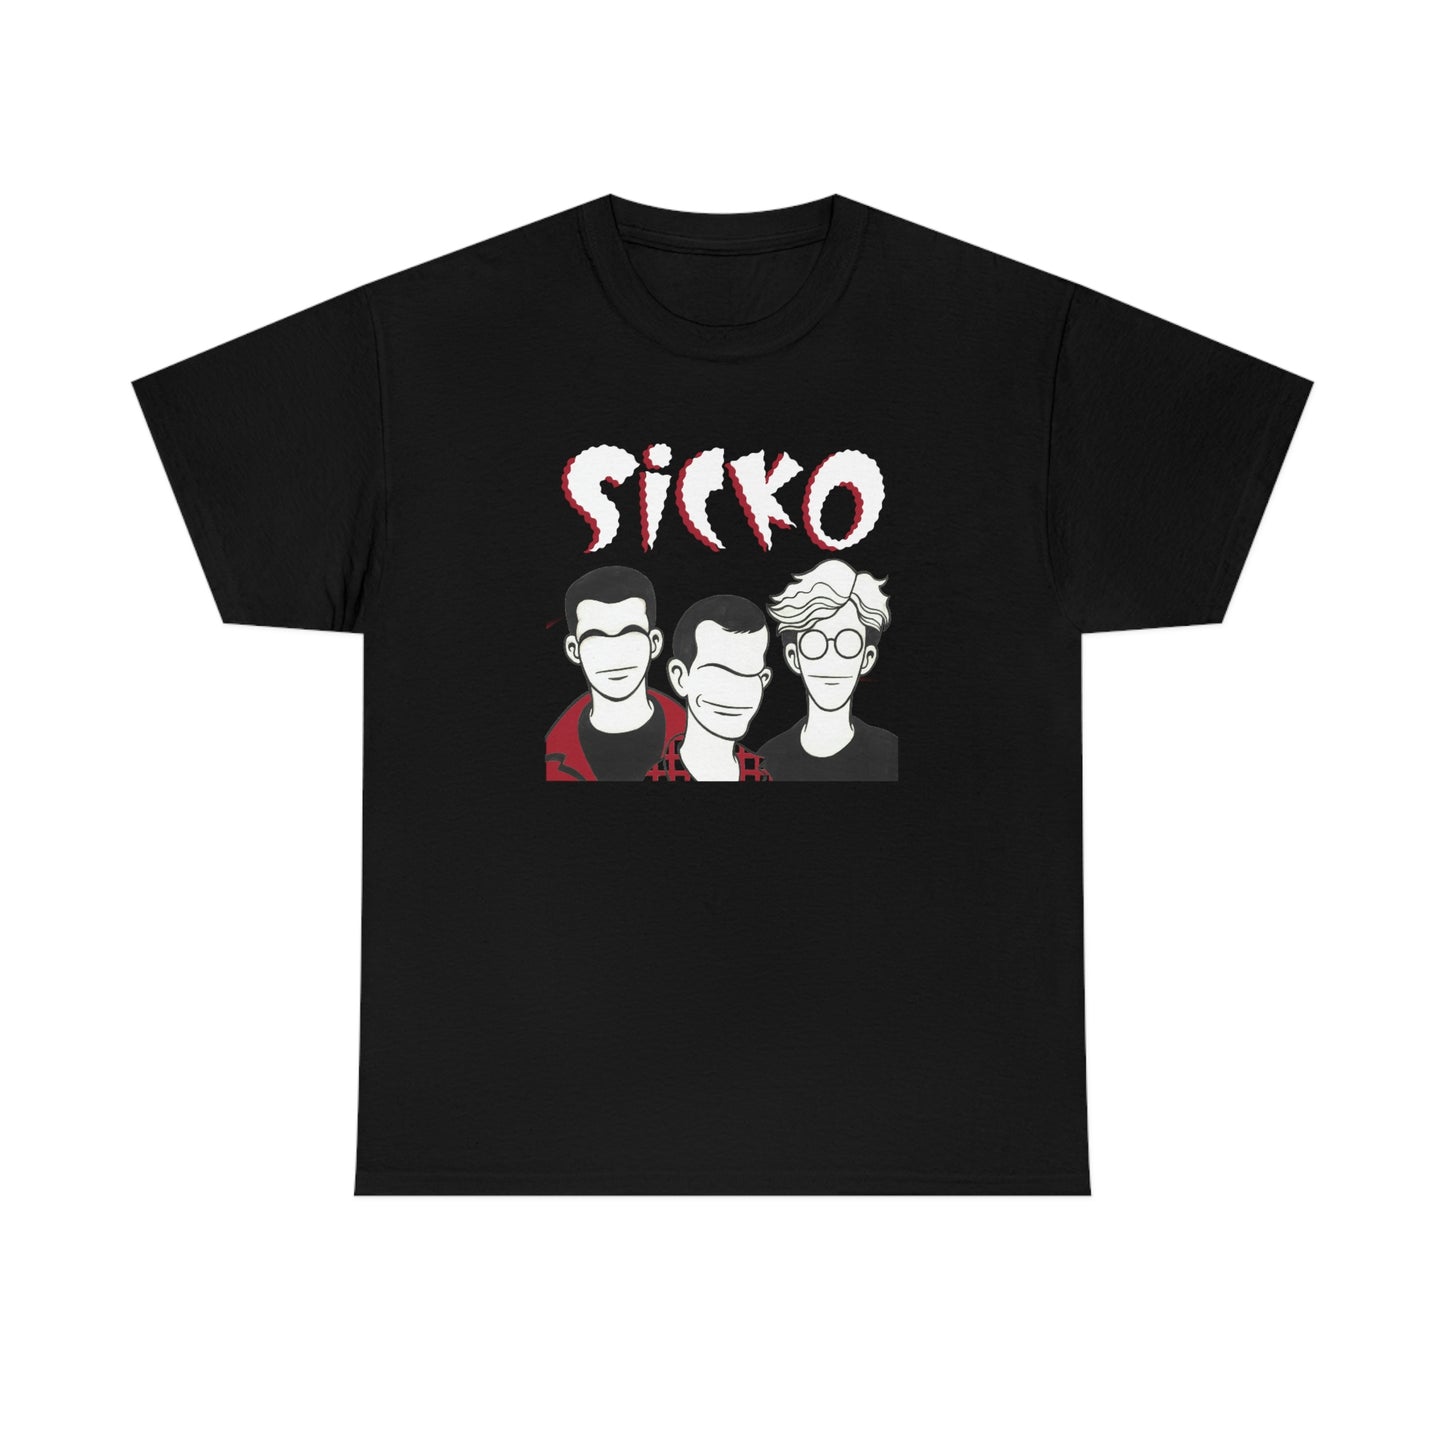 Sicko Black, White, and Red Shirt